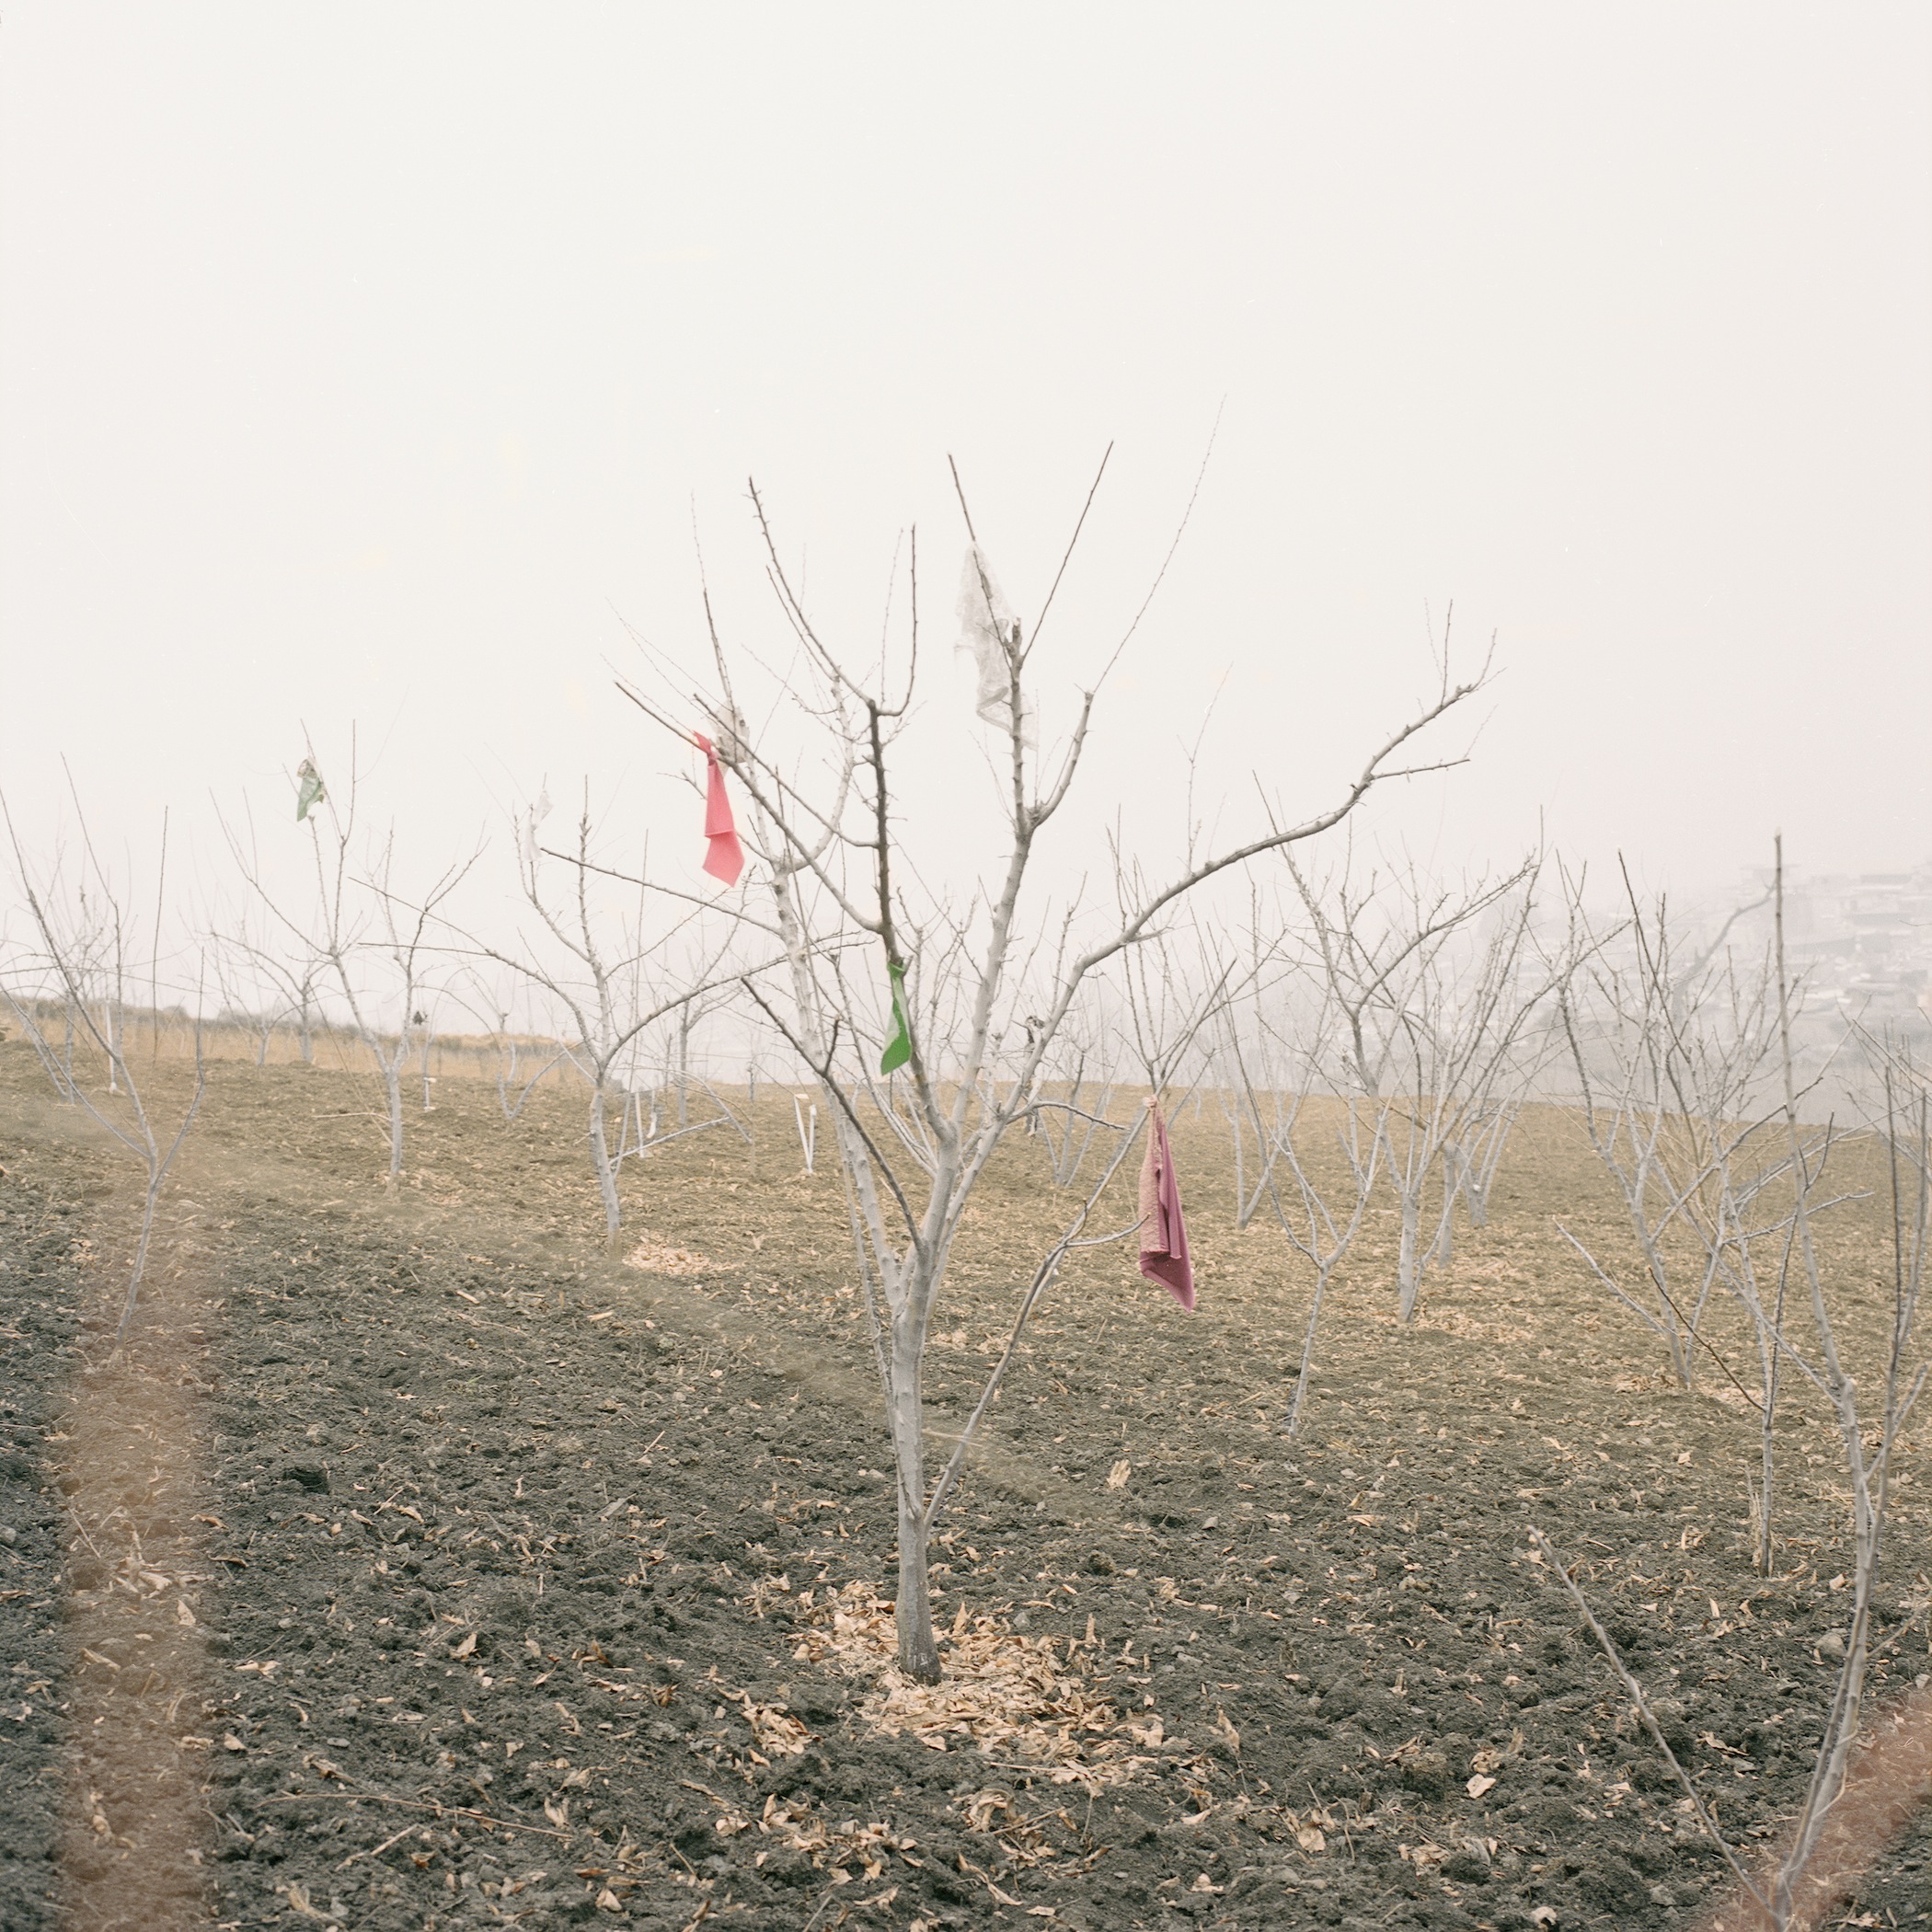 Pieces of Cloth Sprayed with Pesticide in the New Orchards, Radish Village, Sichuan, China, March 2016